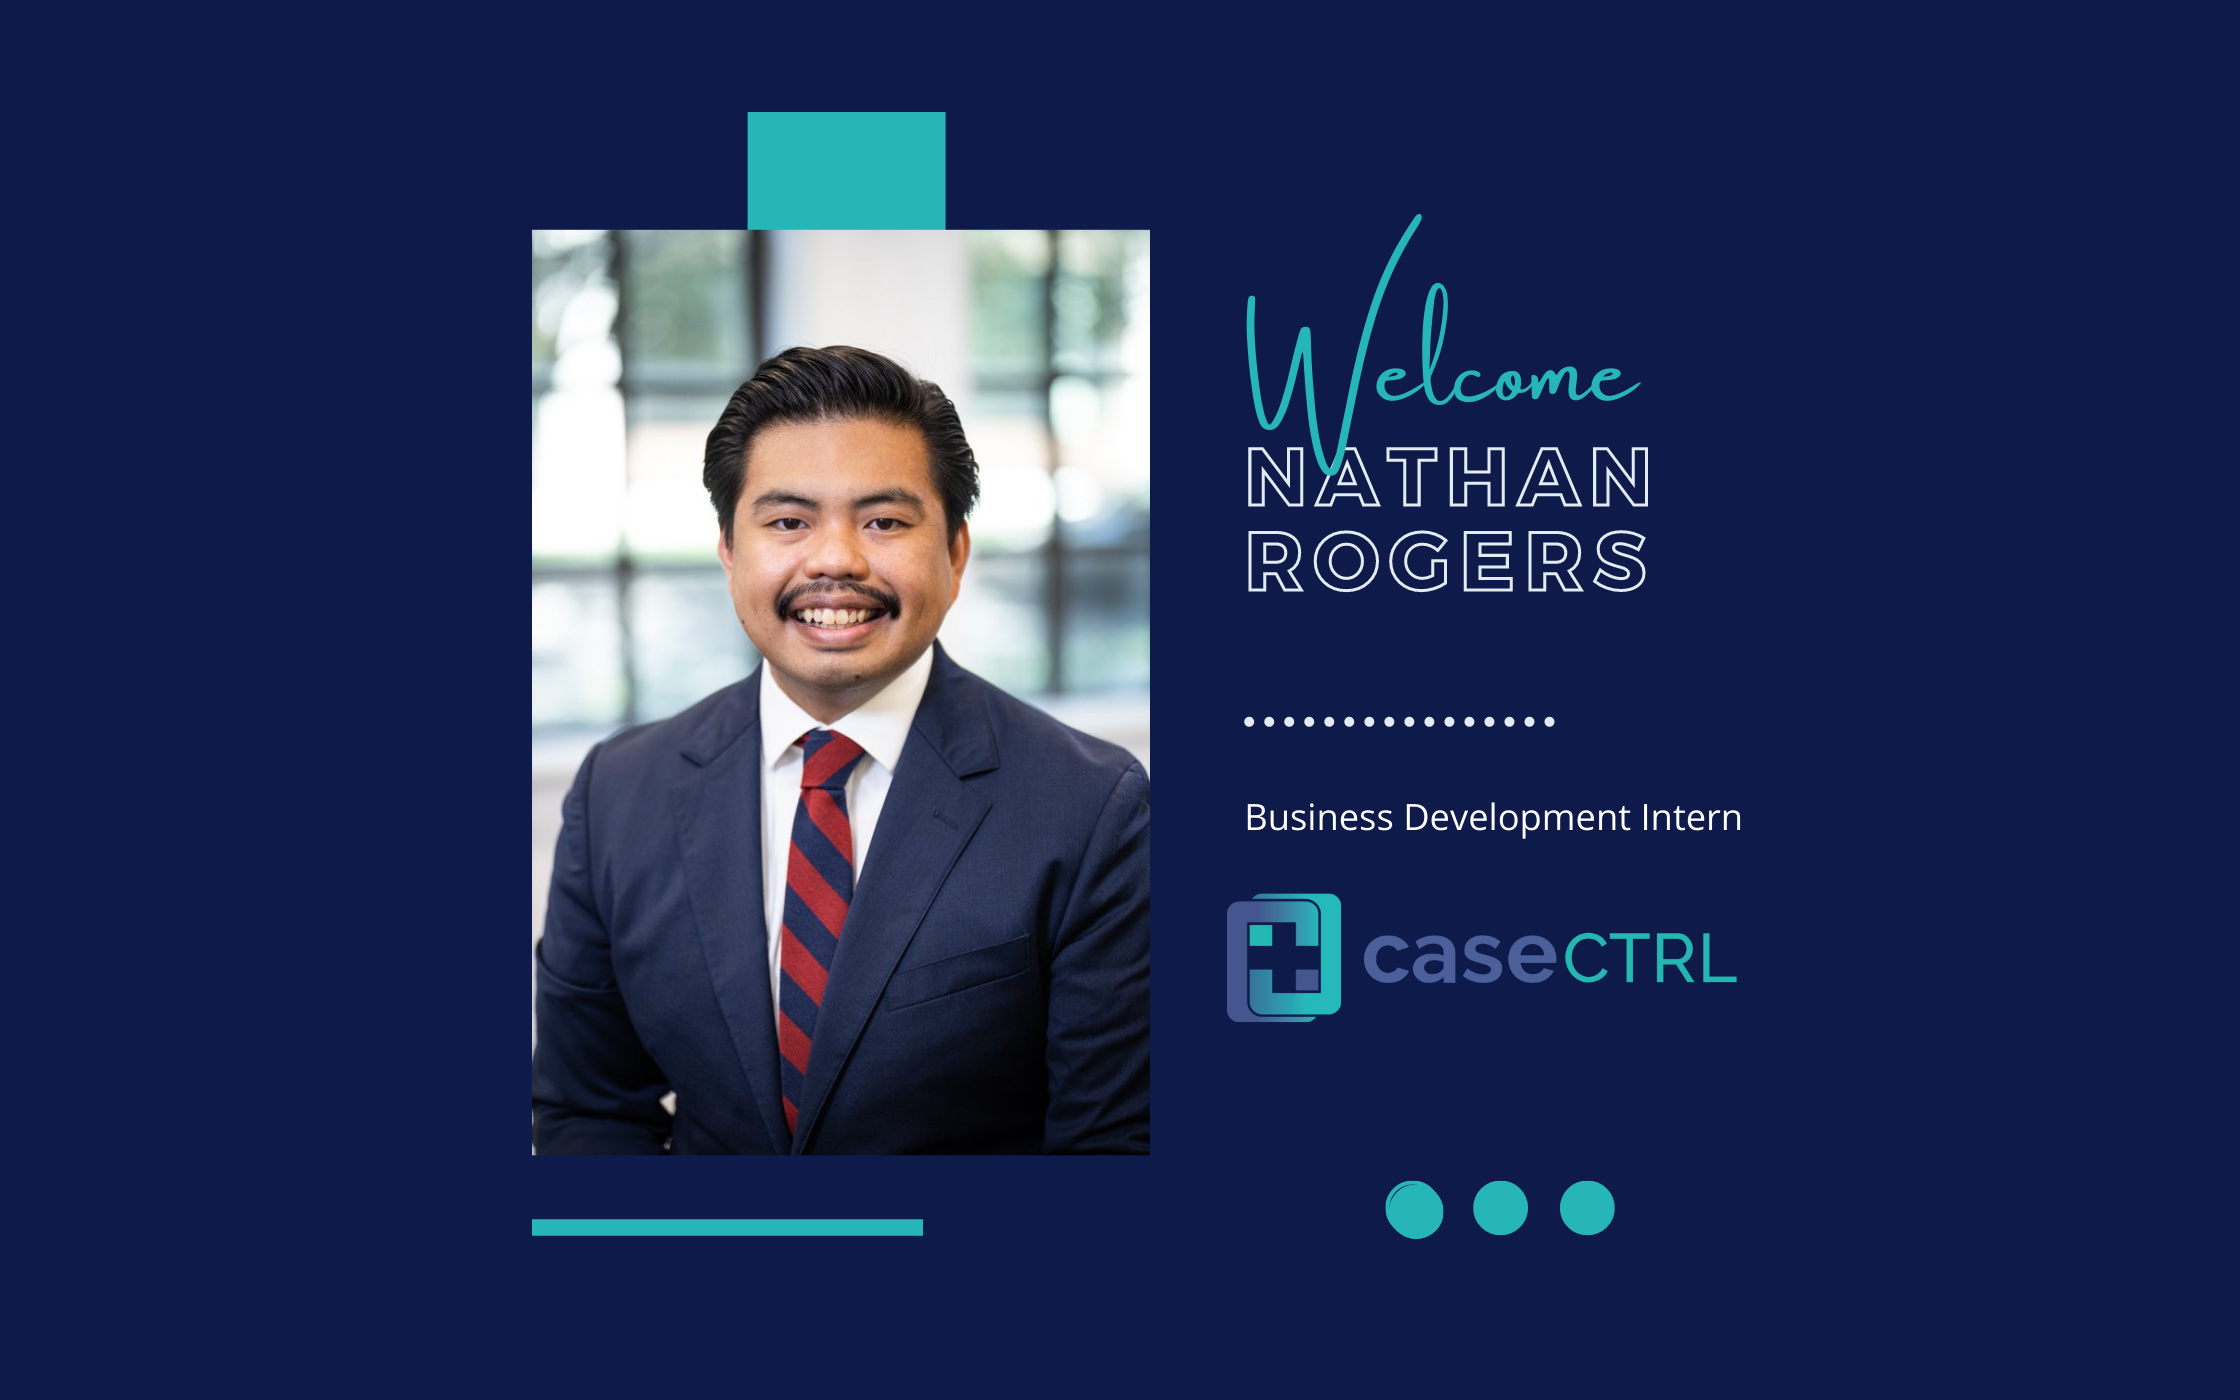 CaseCTRL hires Nathan Rogers - Business Development